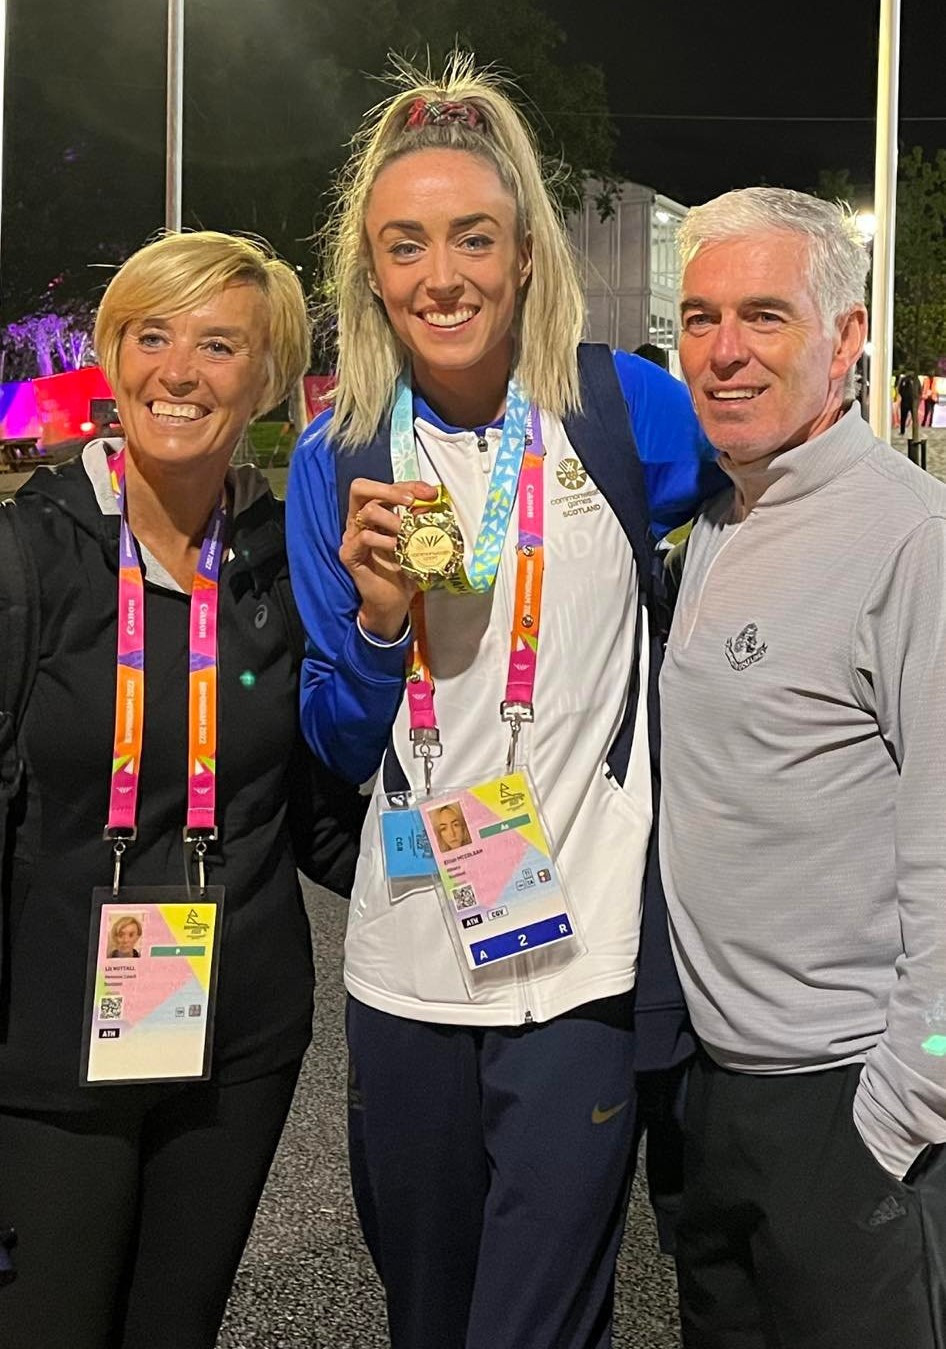 Eilish McColgan comes from good running stock with her father Peter, right, also having been a world-class athlete ©Facebook